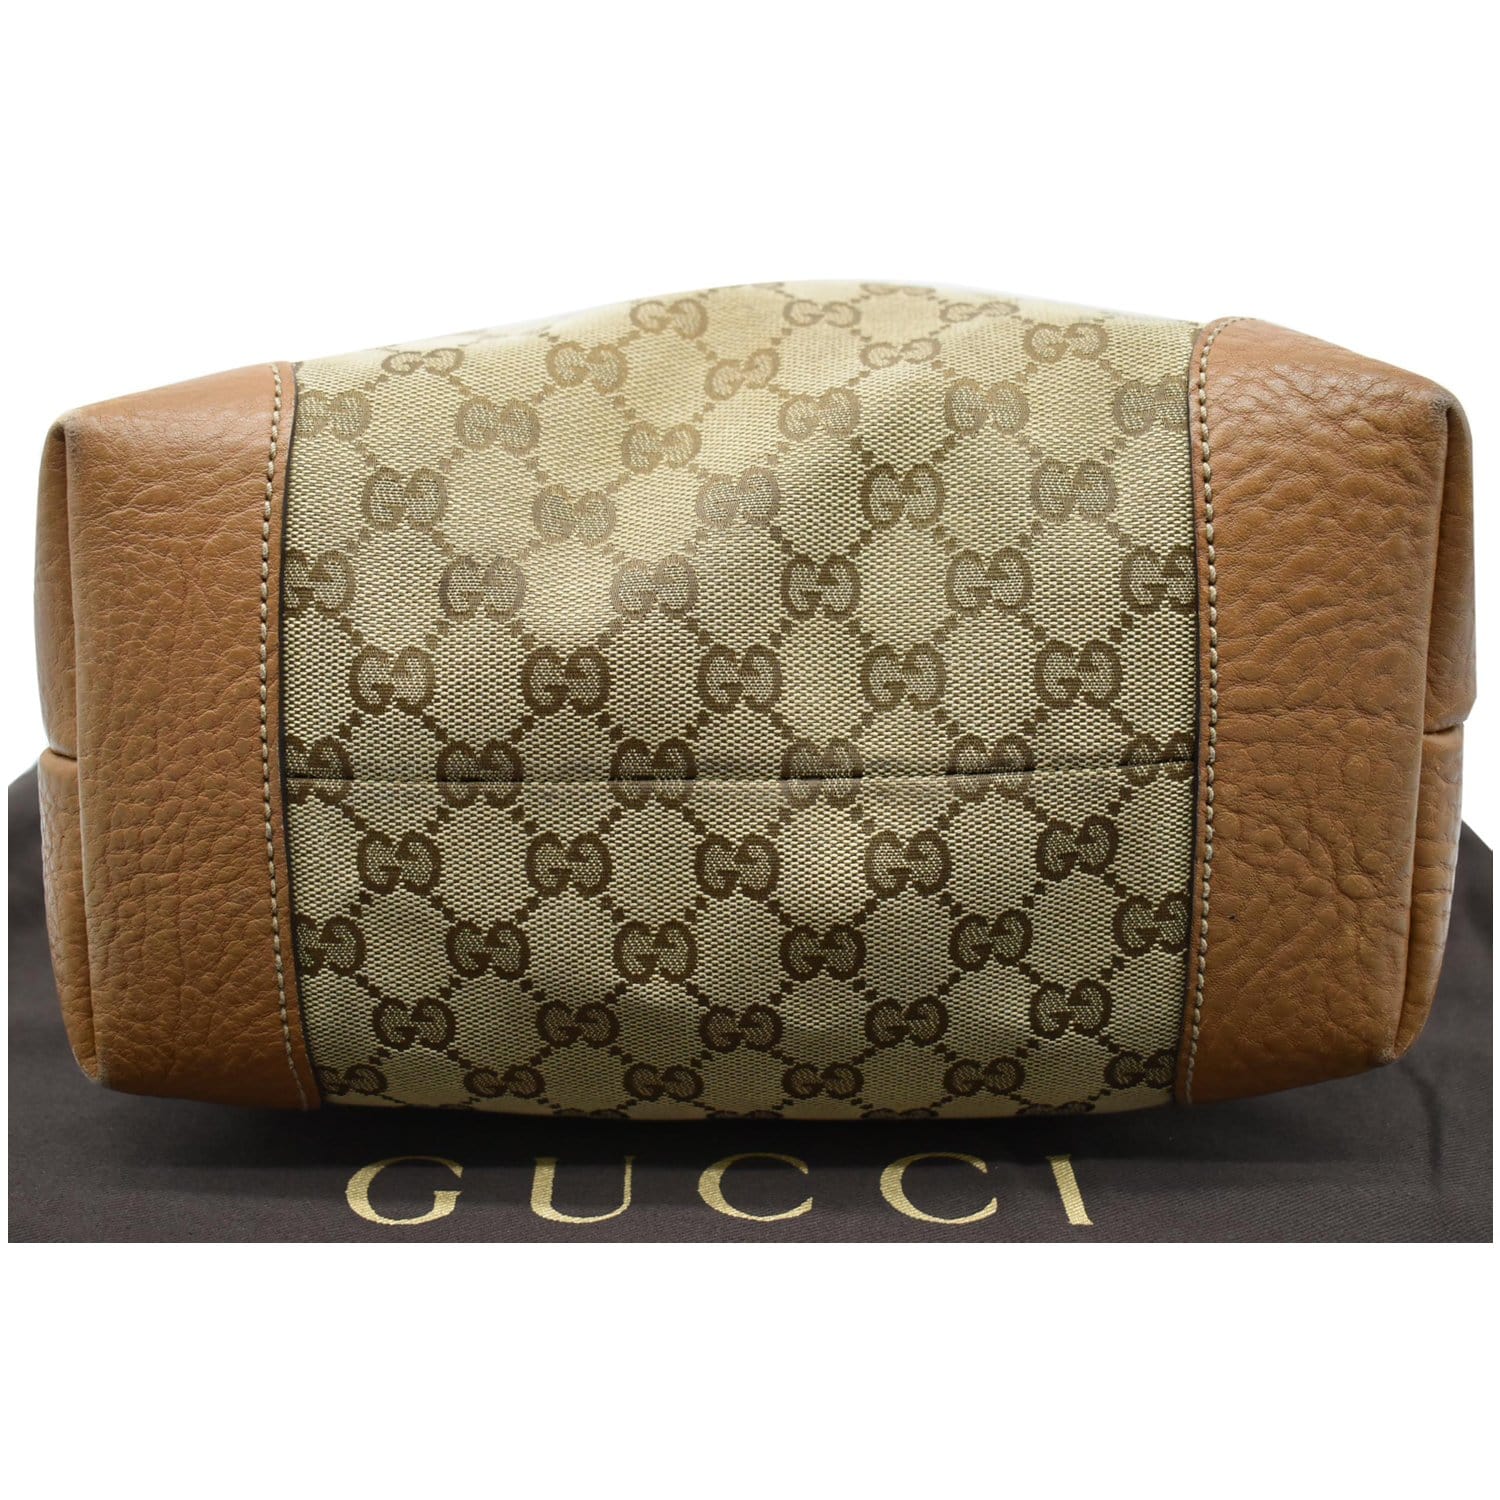 Authenticated Used Auth Gucci Second Bag 000 46 4857 Women's Handbag Beige  